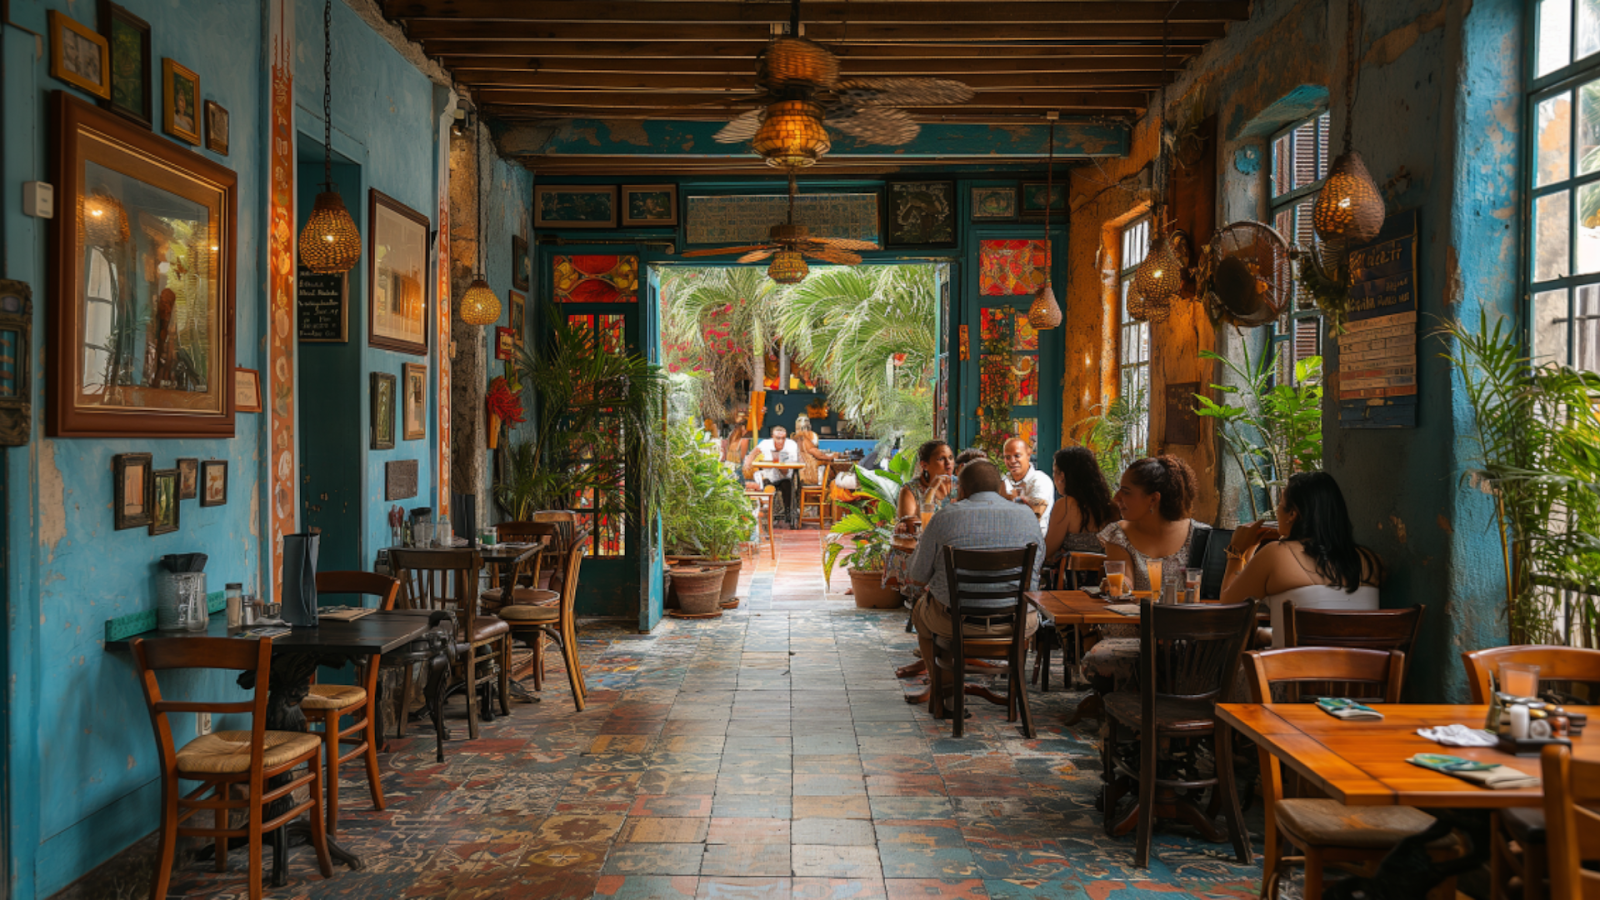 Guests savor authentic Cuban dishes in the festive ambiance of a Little Havana eatery.